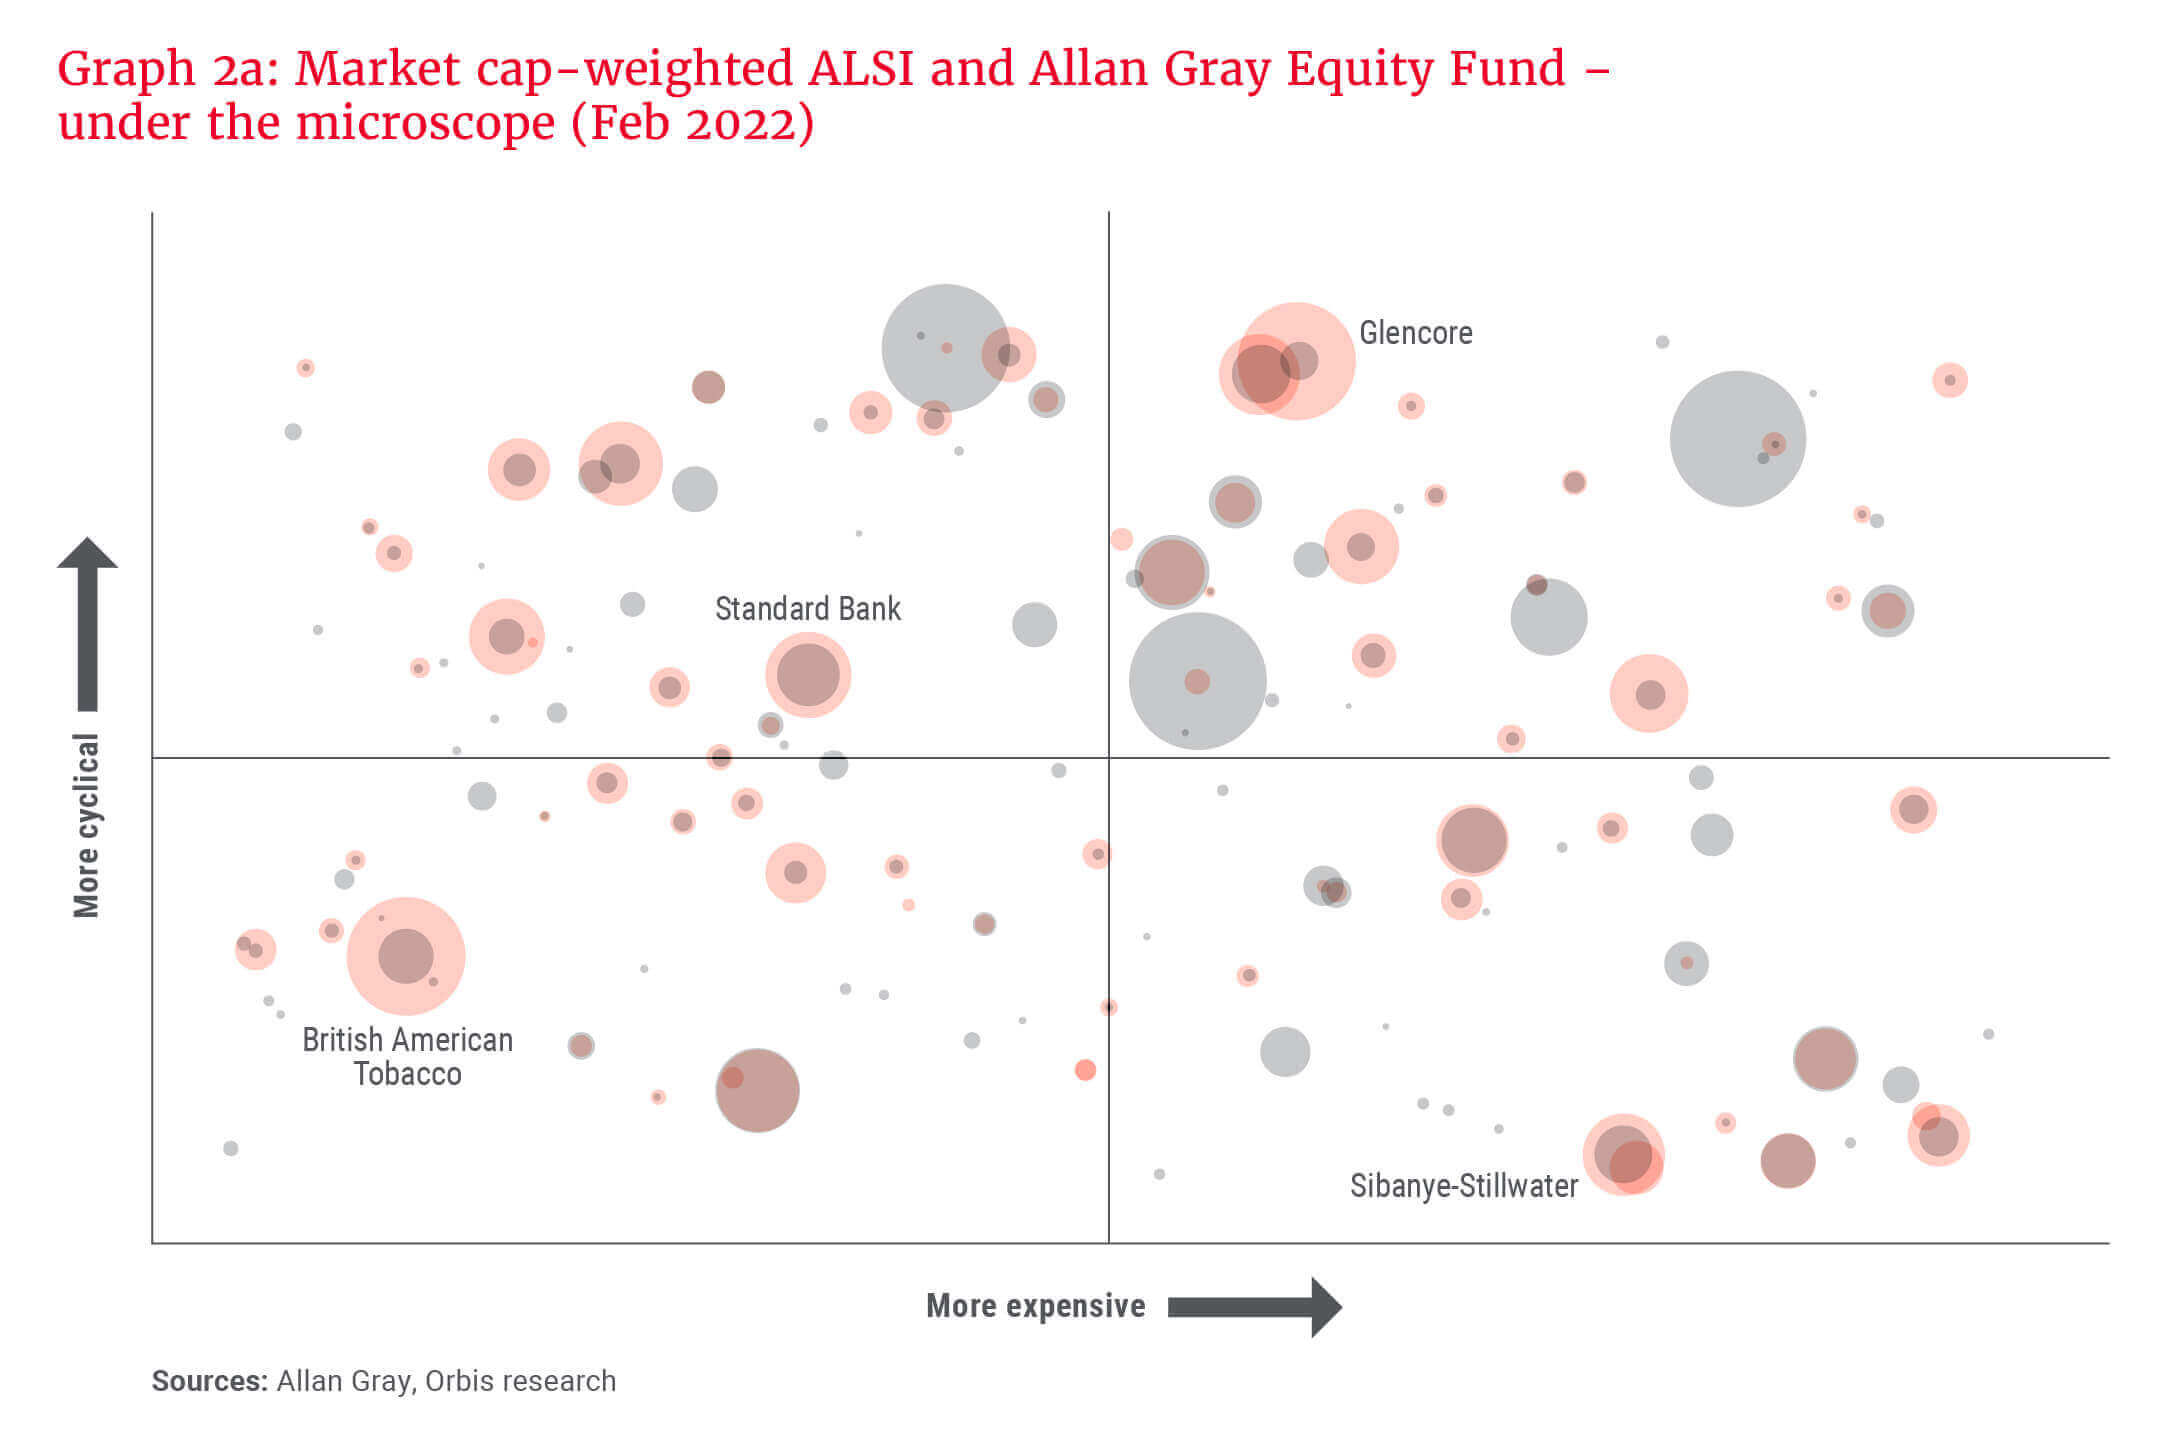 Graph 2a_Market cap-weighted ALSI and AGEF - under the microscope (Feb 2022).jpg